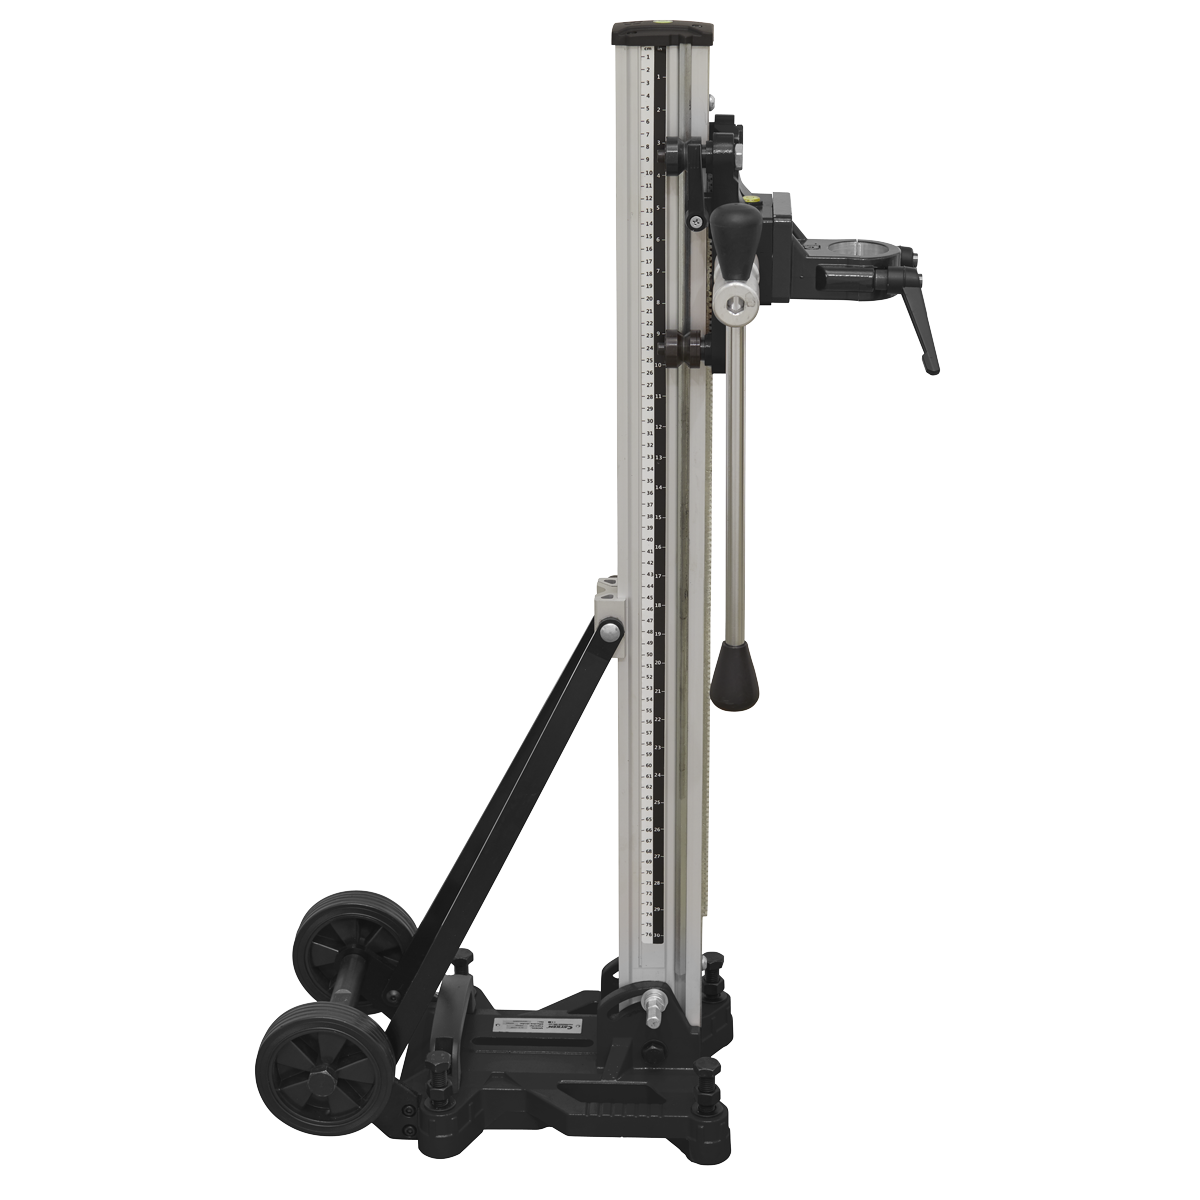 Sealey Diamond Core Drill Stand with tilt function